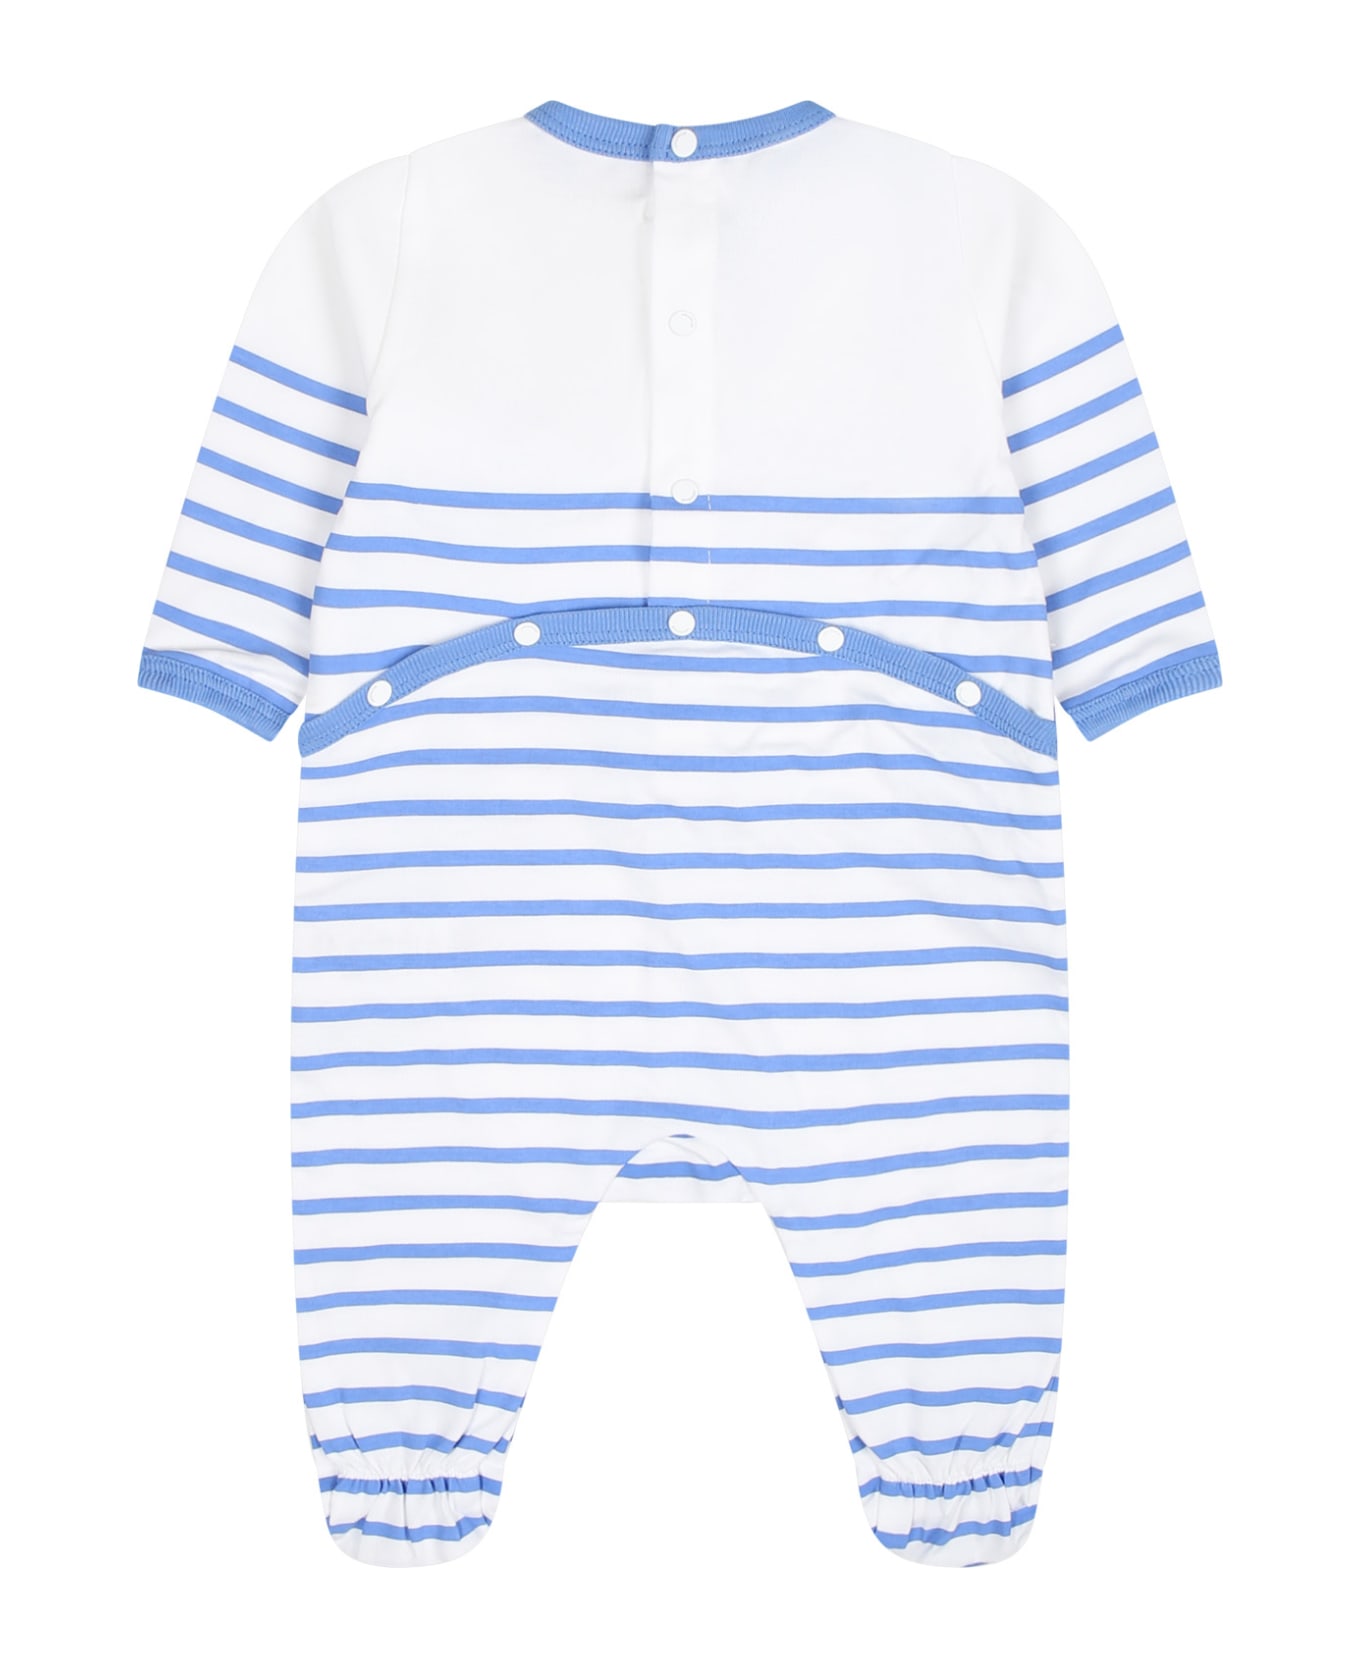 Givenchy Light Blue Set For Baby Boy With Logo Stripes - Azzurro